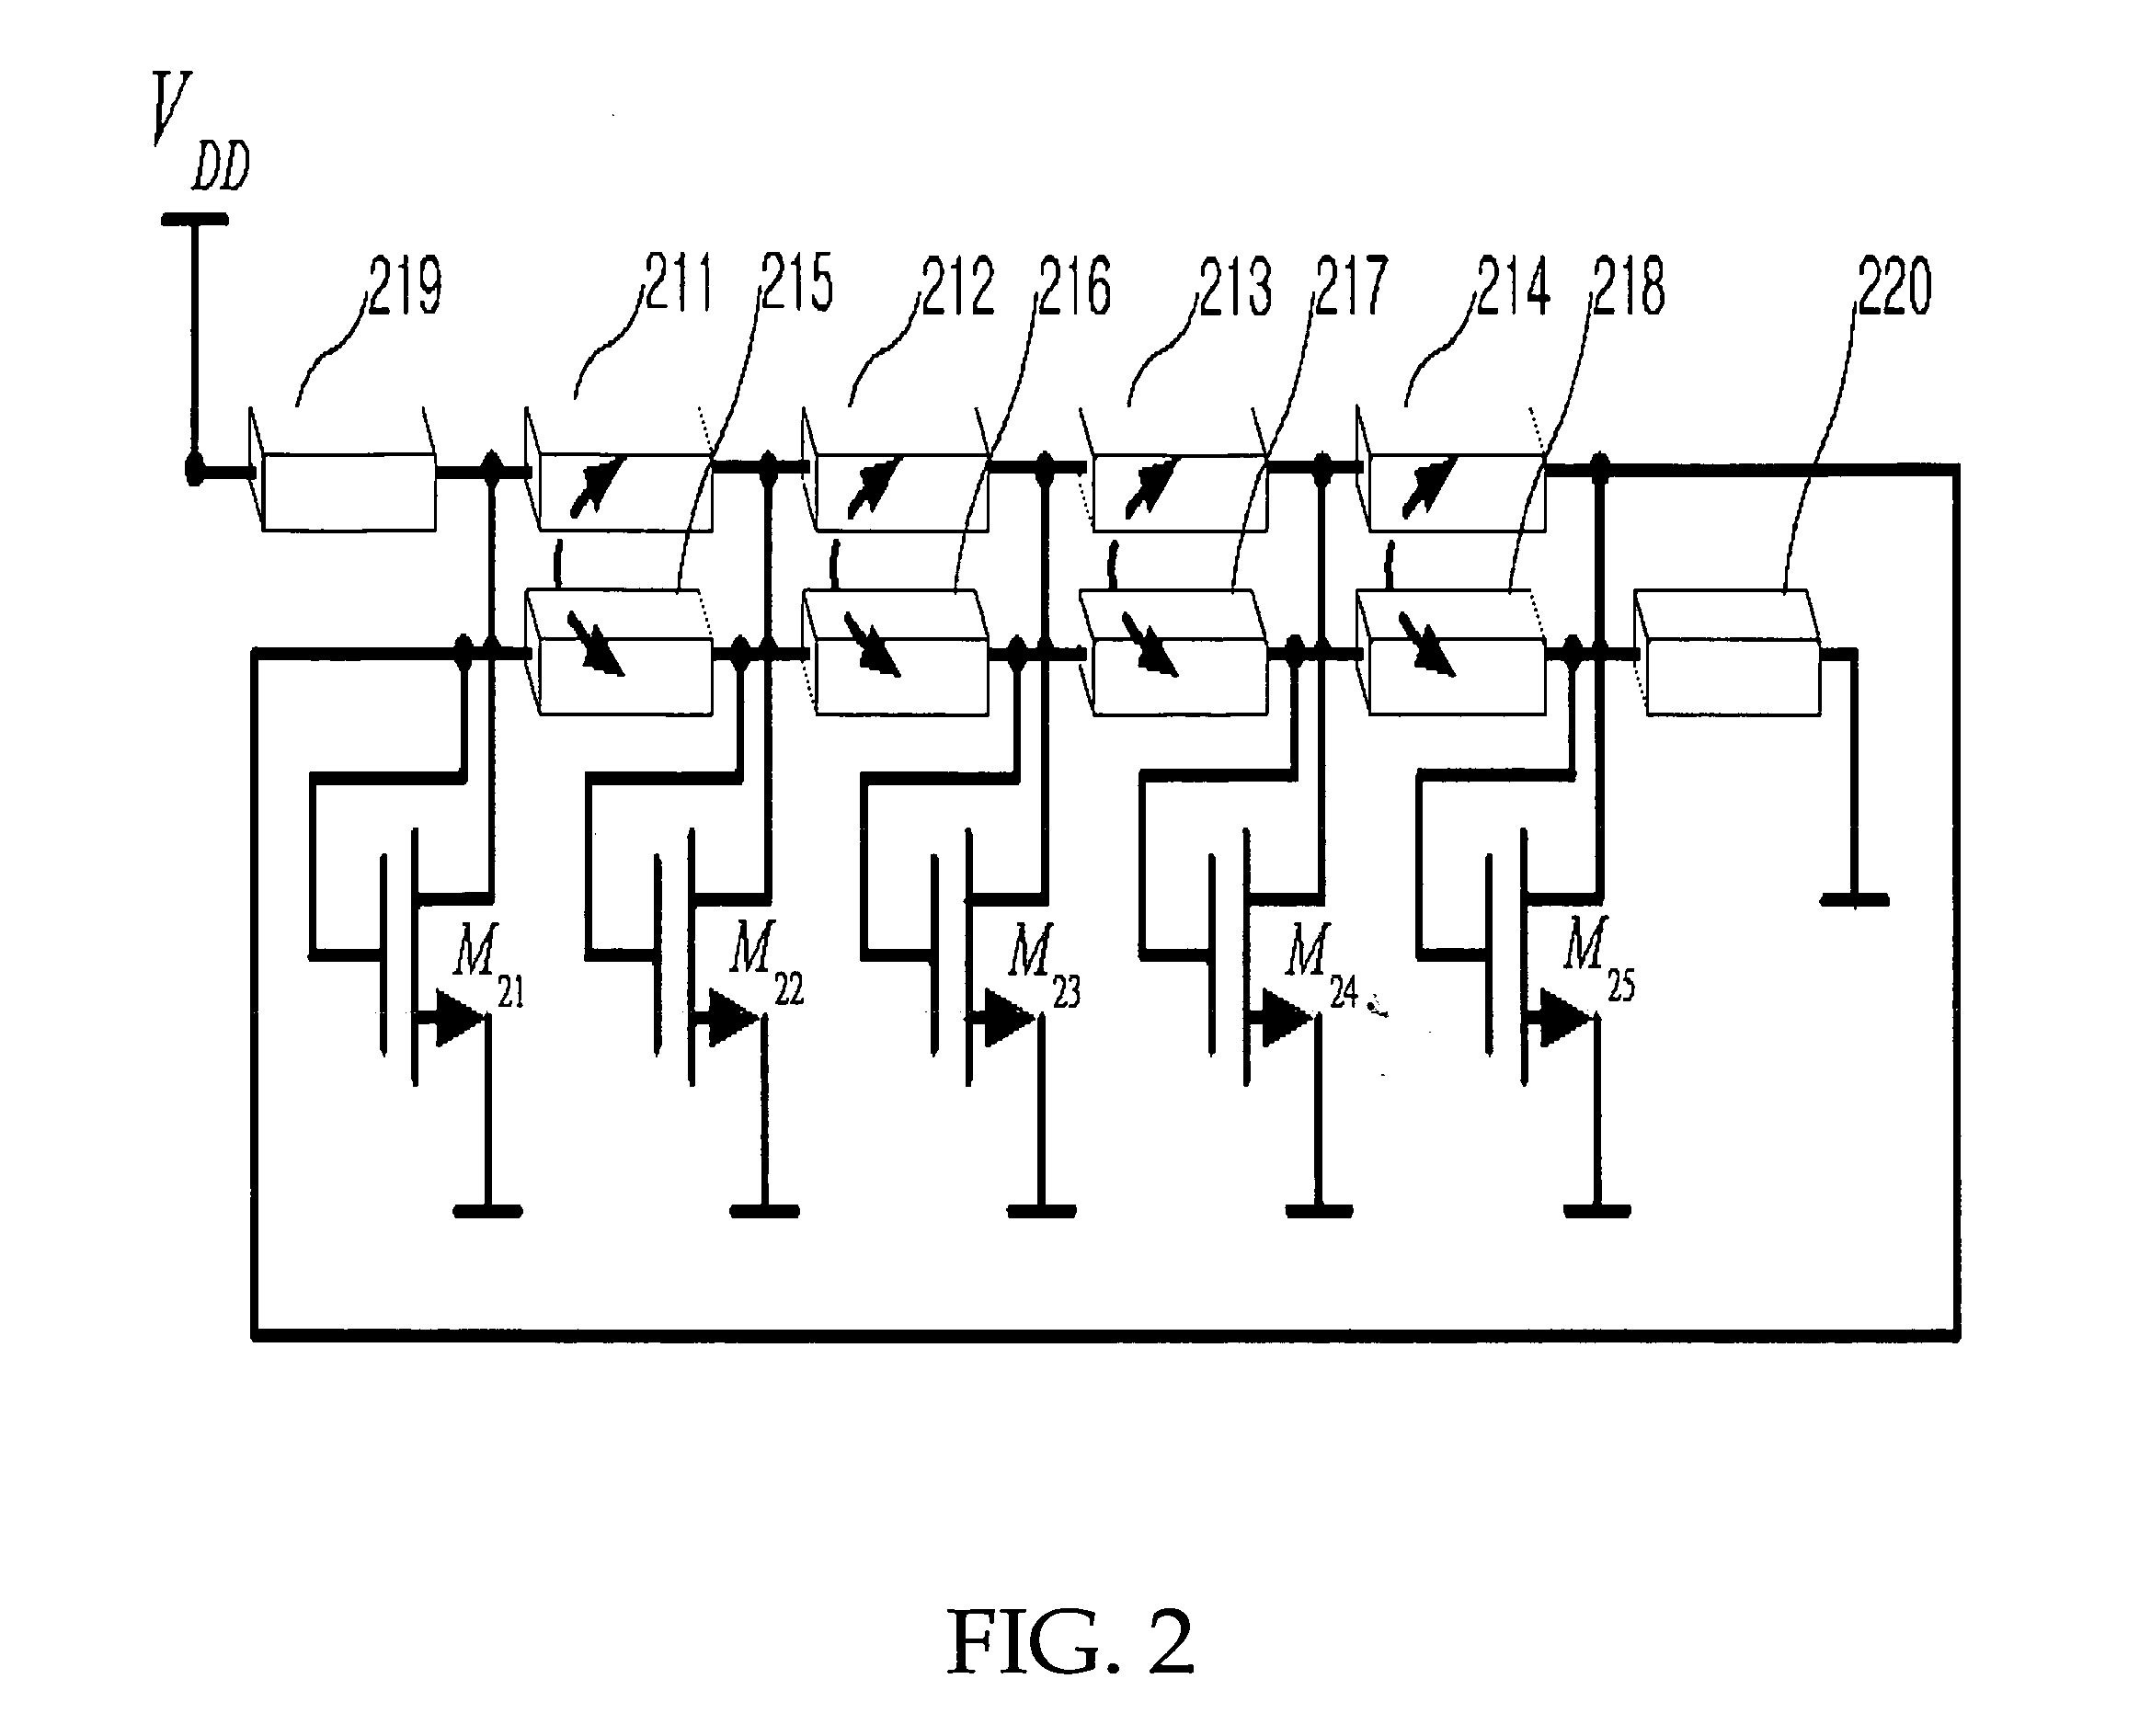 High frequency distributed oscillator using coupled transmission line